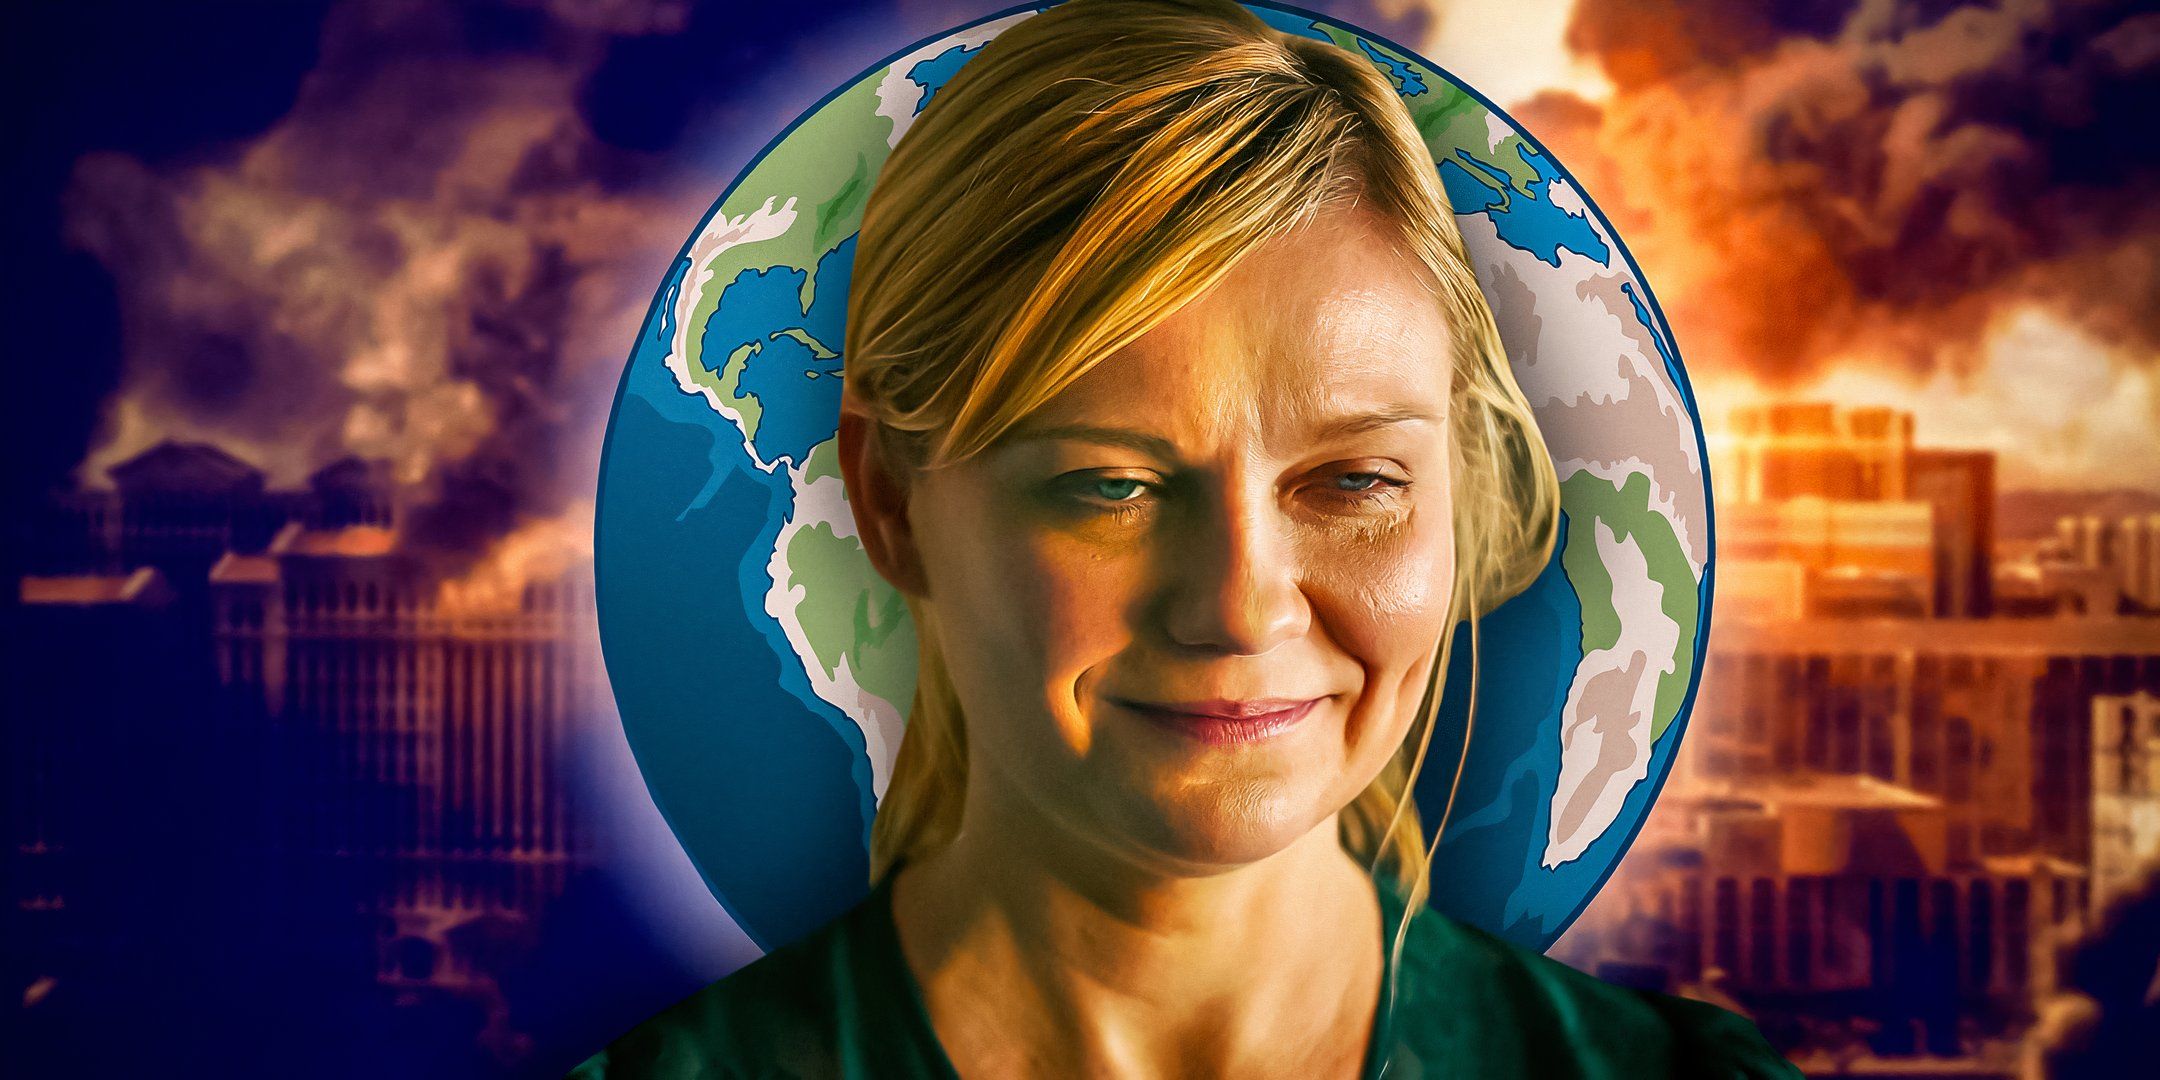 Kirsten Dunst as Lee looking upset with a city and globe behind her from Alex Garland's Civil War